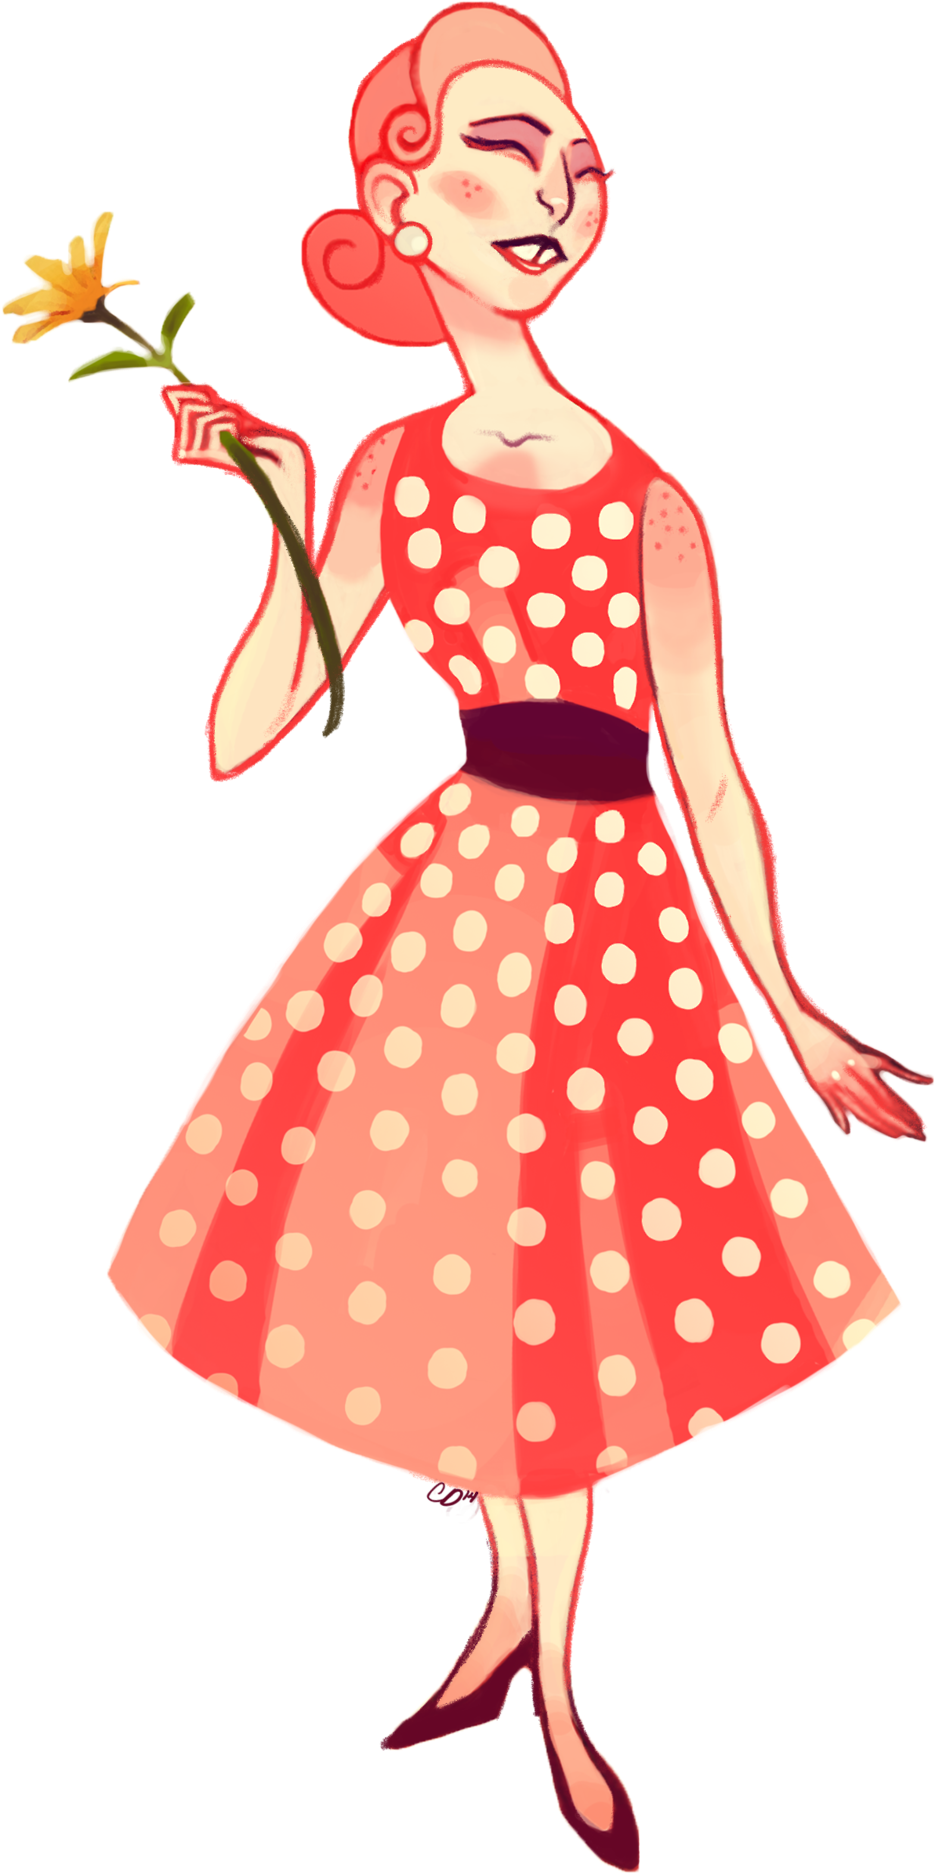 Original Characters Based Off Of A Caddy Vintage Housewive - Polka Dot (997x1920)